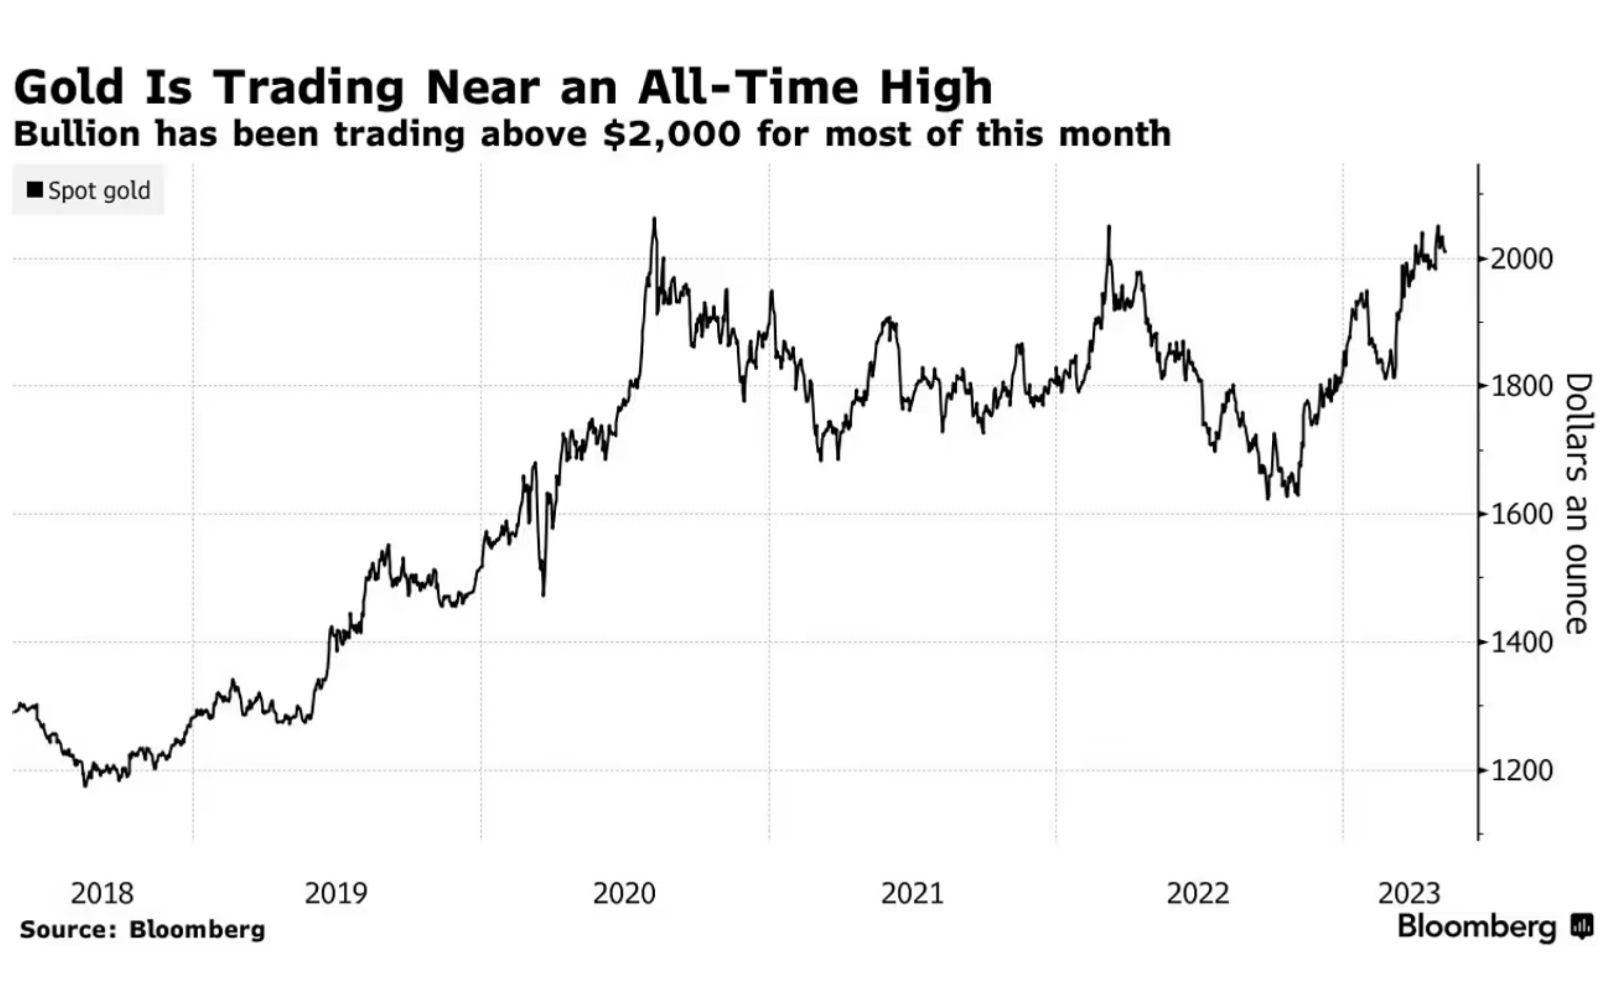 Gold prices near all-time highs